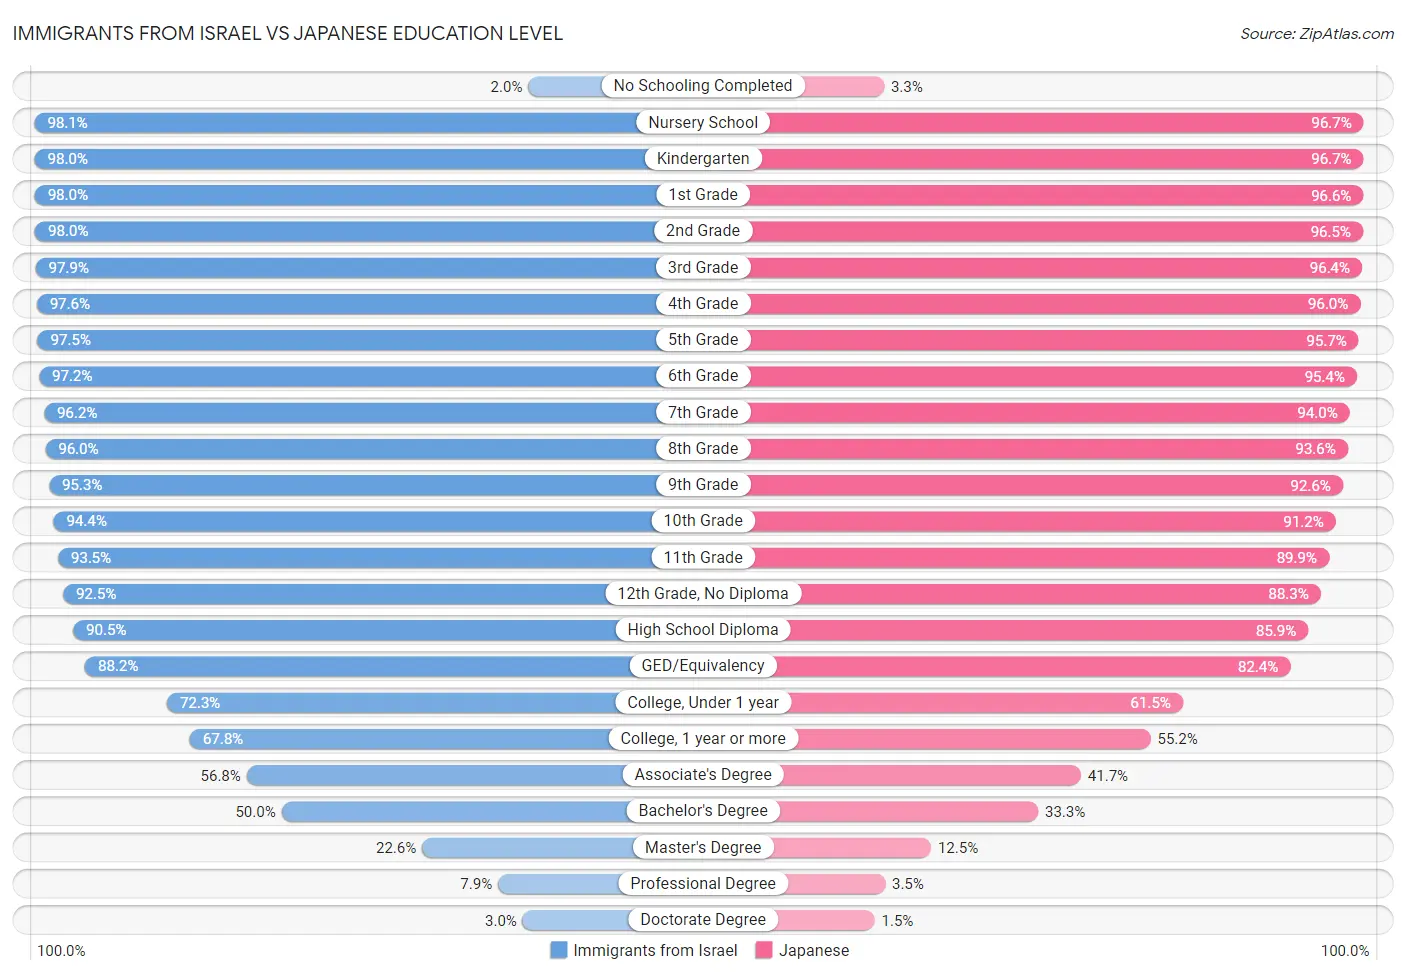 Immigrants from Israel vs Japanese Education Level